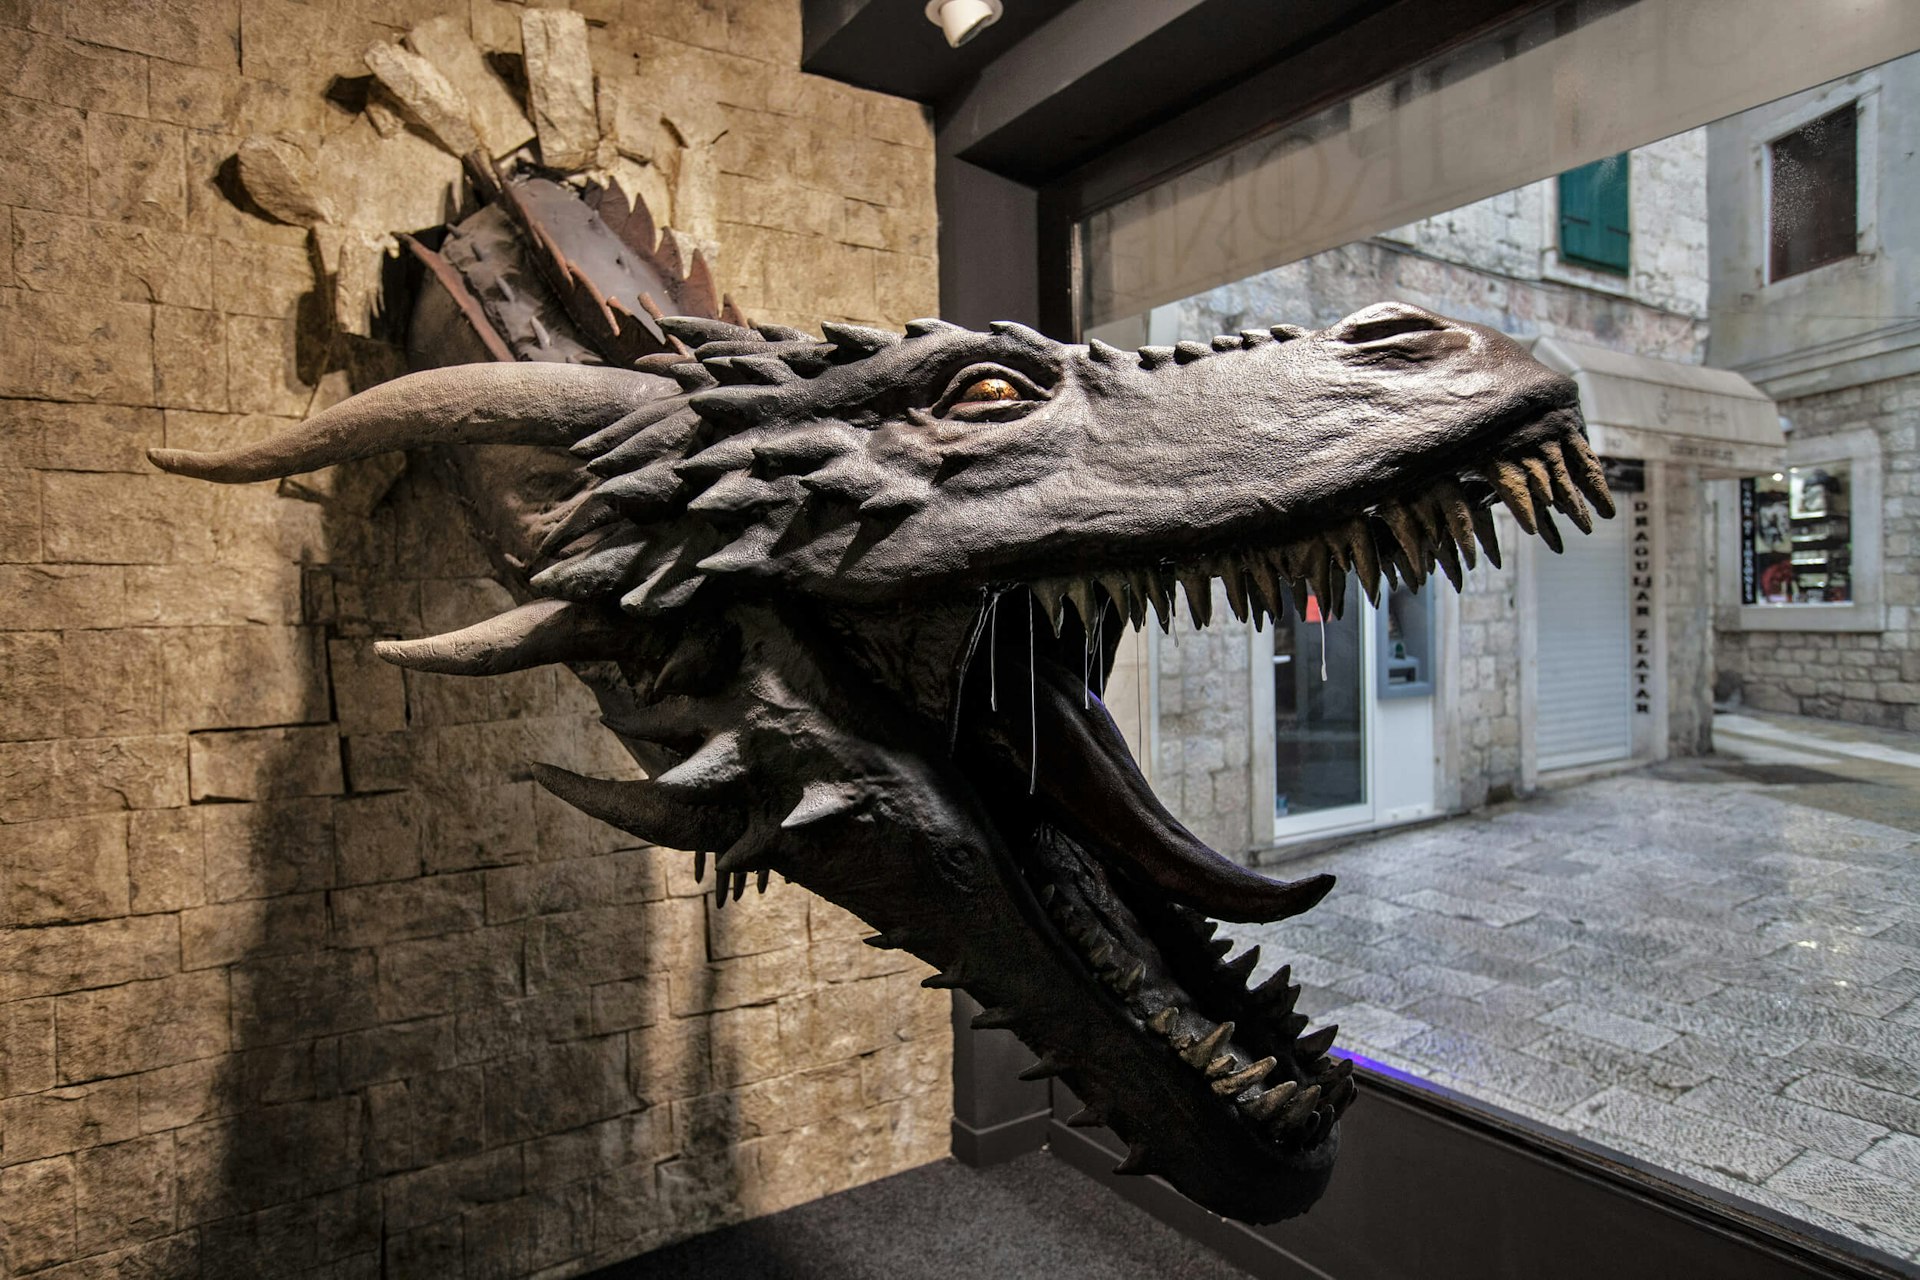 A model of Drogon the dragon bursting through a wall with his jaws open at the Game of Thrones' museum in Split